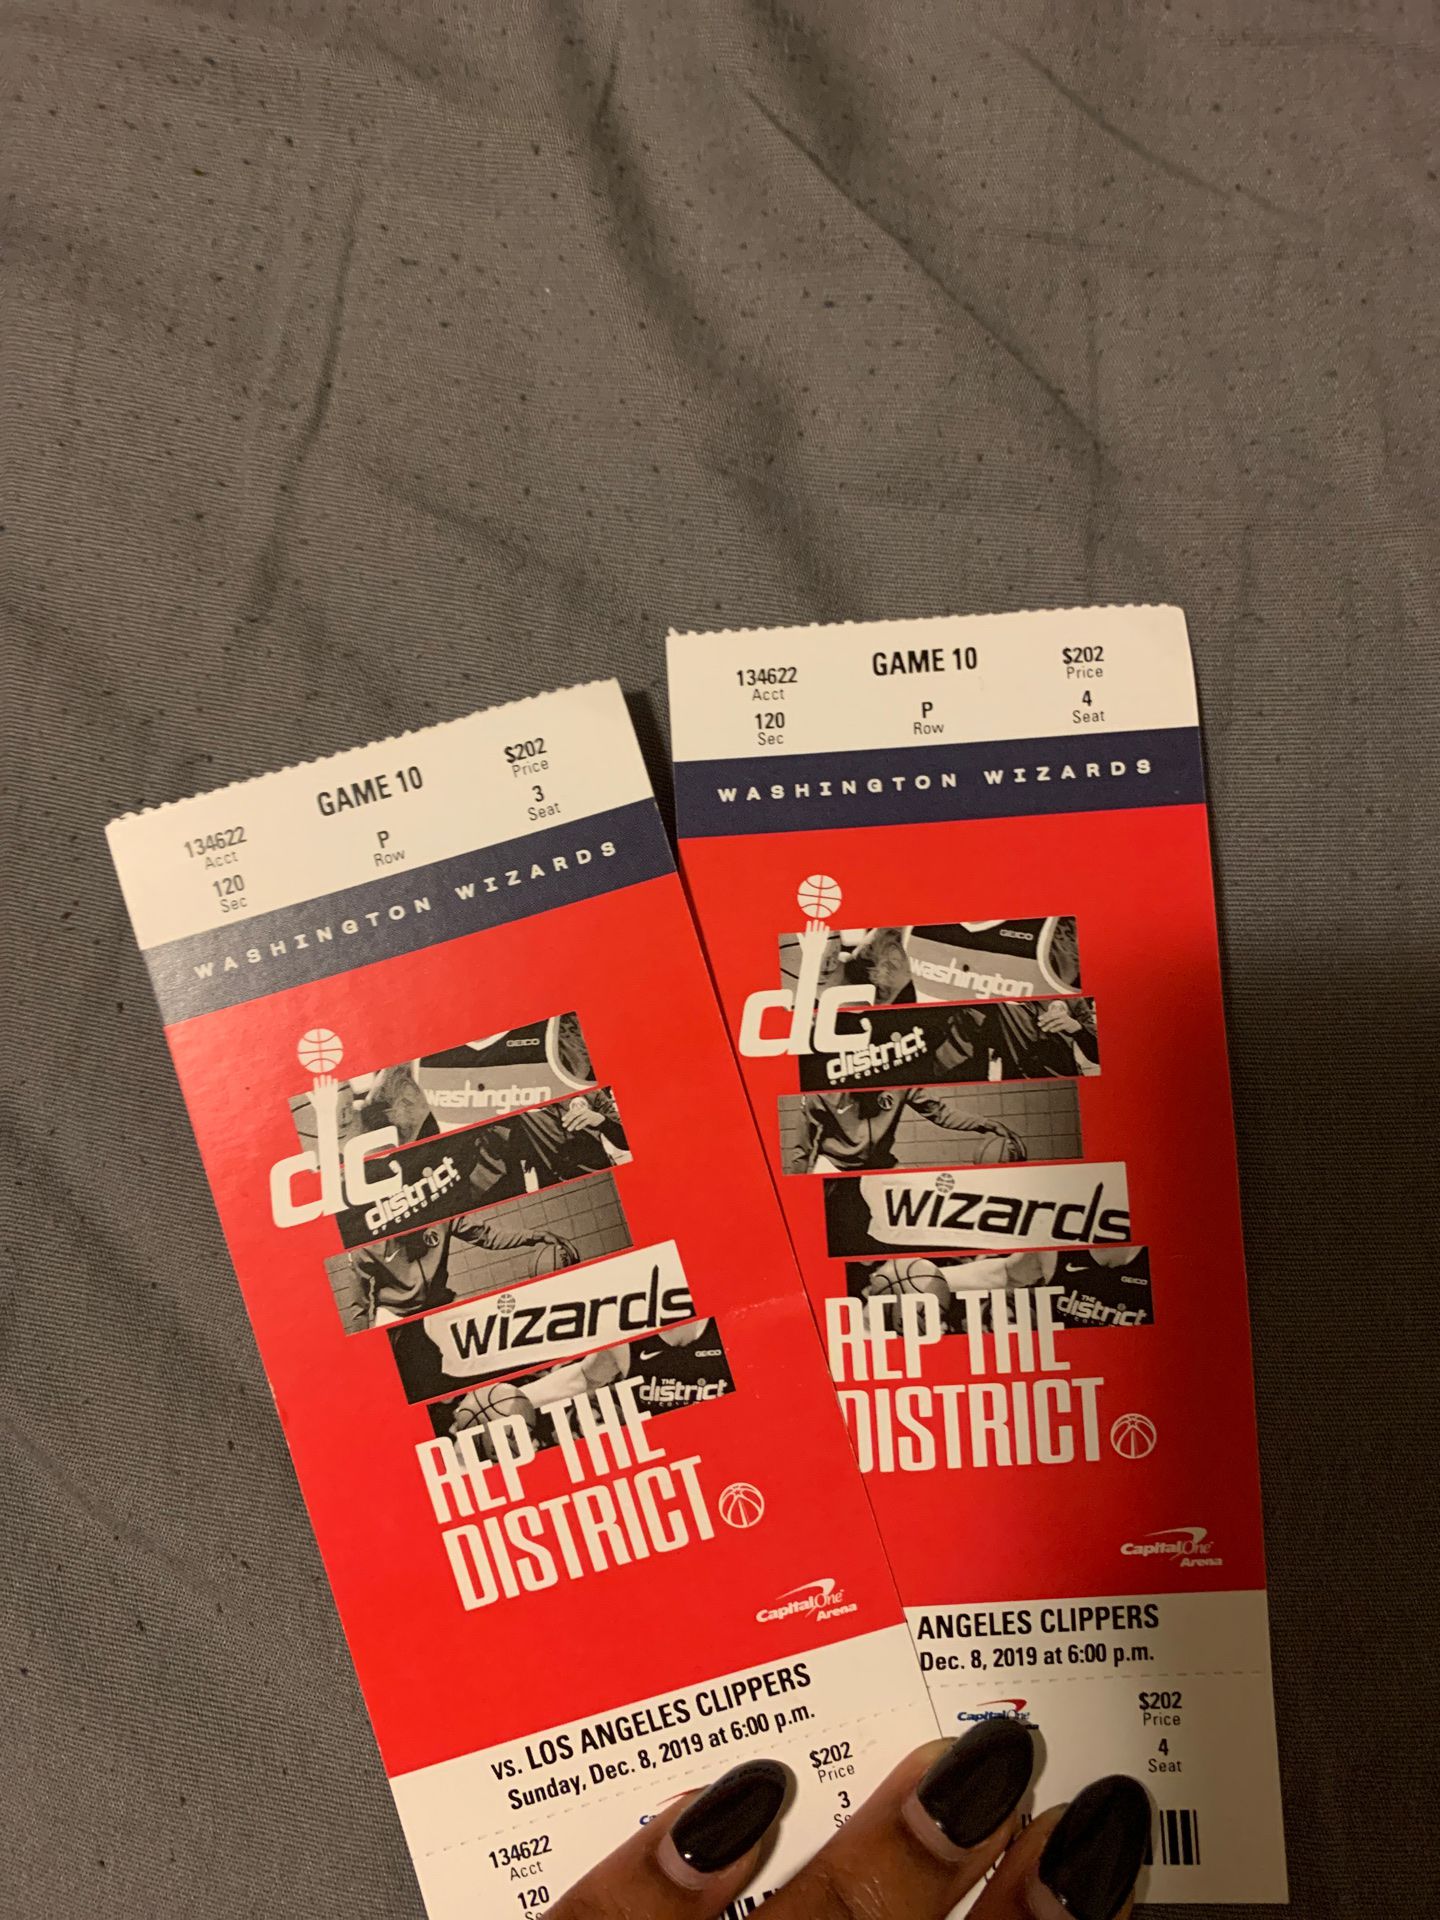 Wizards vs. Clippers Tickets $190 each